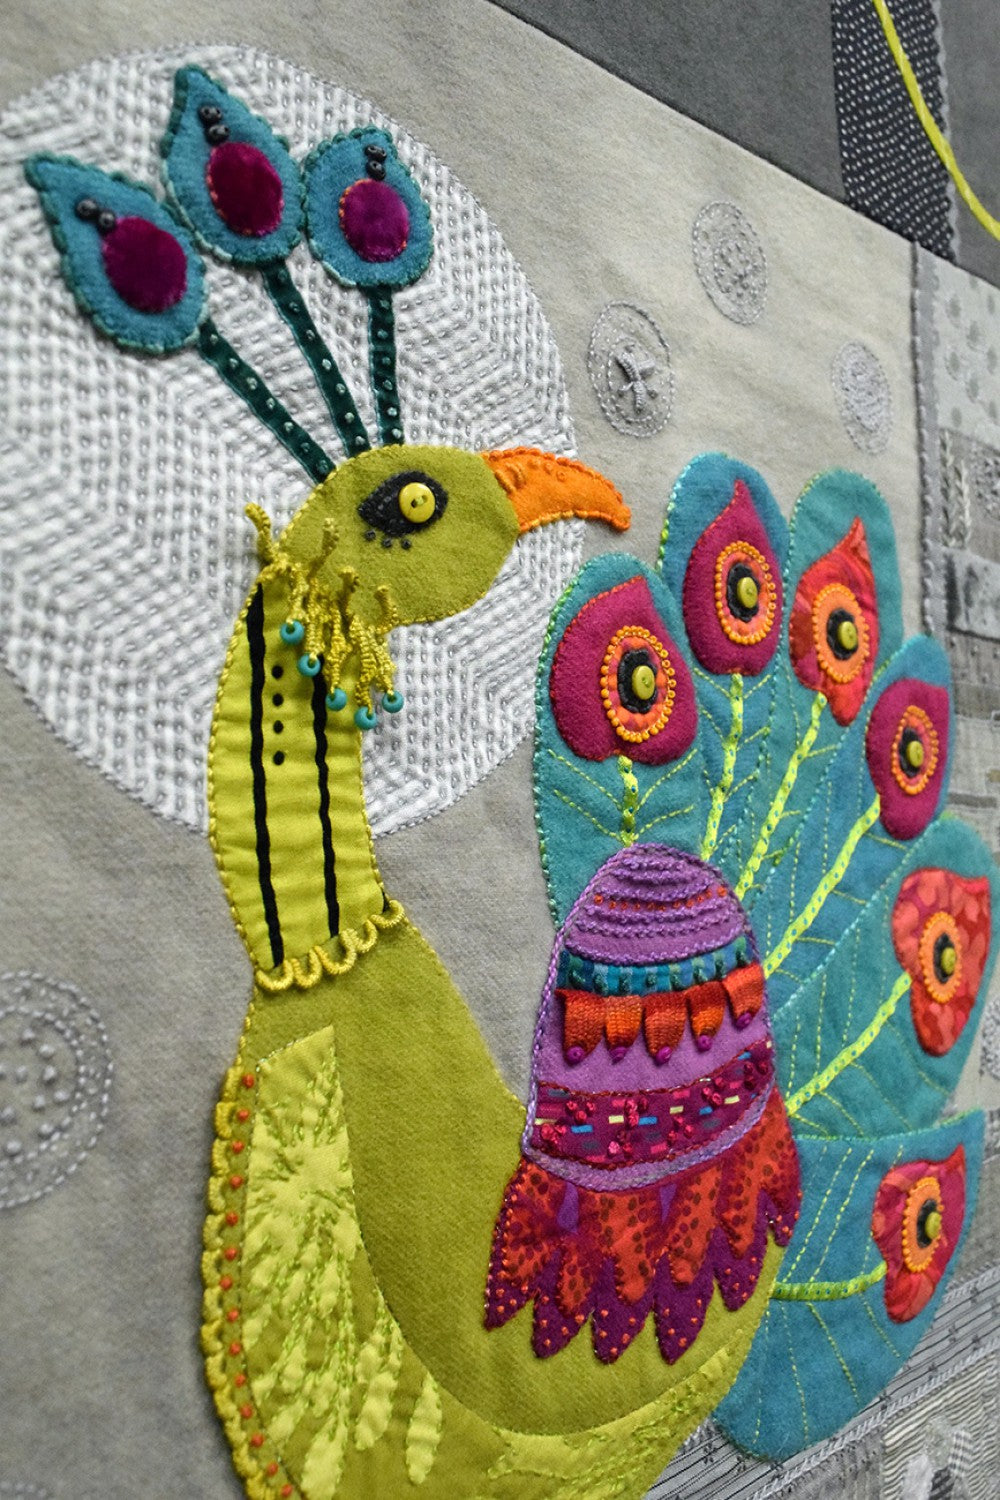 Peacock Block - Applique, Embroidery, and Quilting Pattern by Sue Spargo of Folk Art Quilts